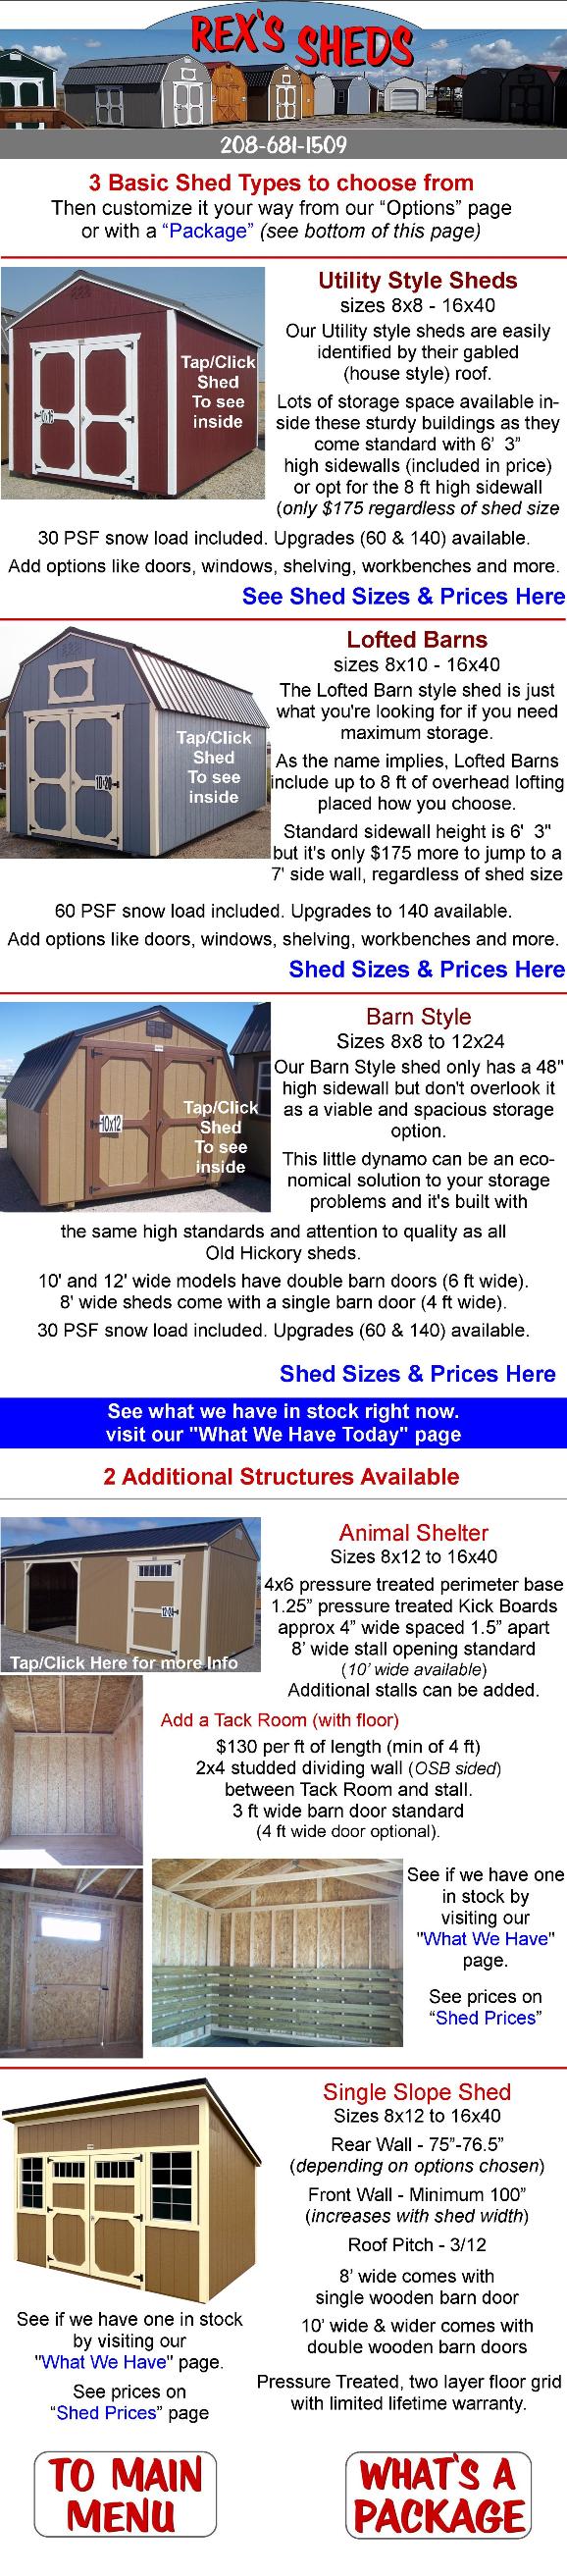 image_and_descriptions_of_all_shed_types_and_styles_available_at_rexs_sheds_idaho_falls